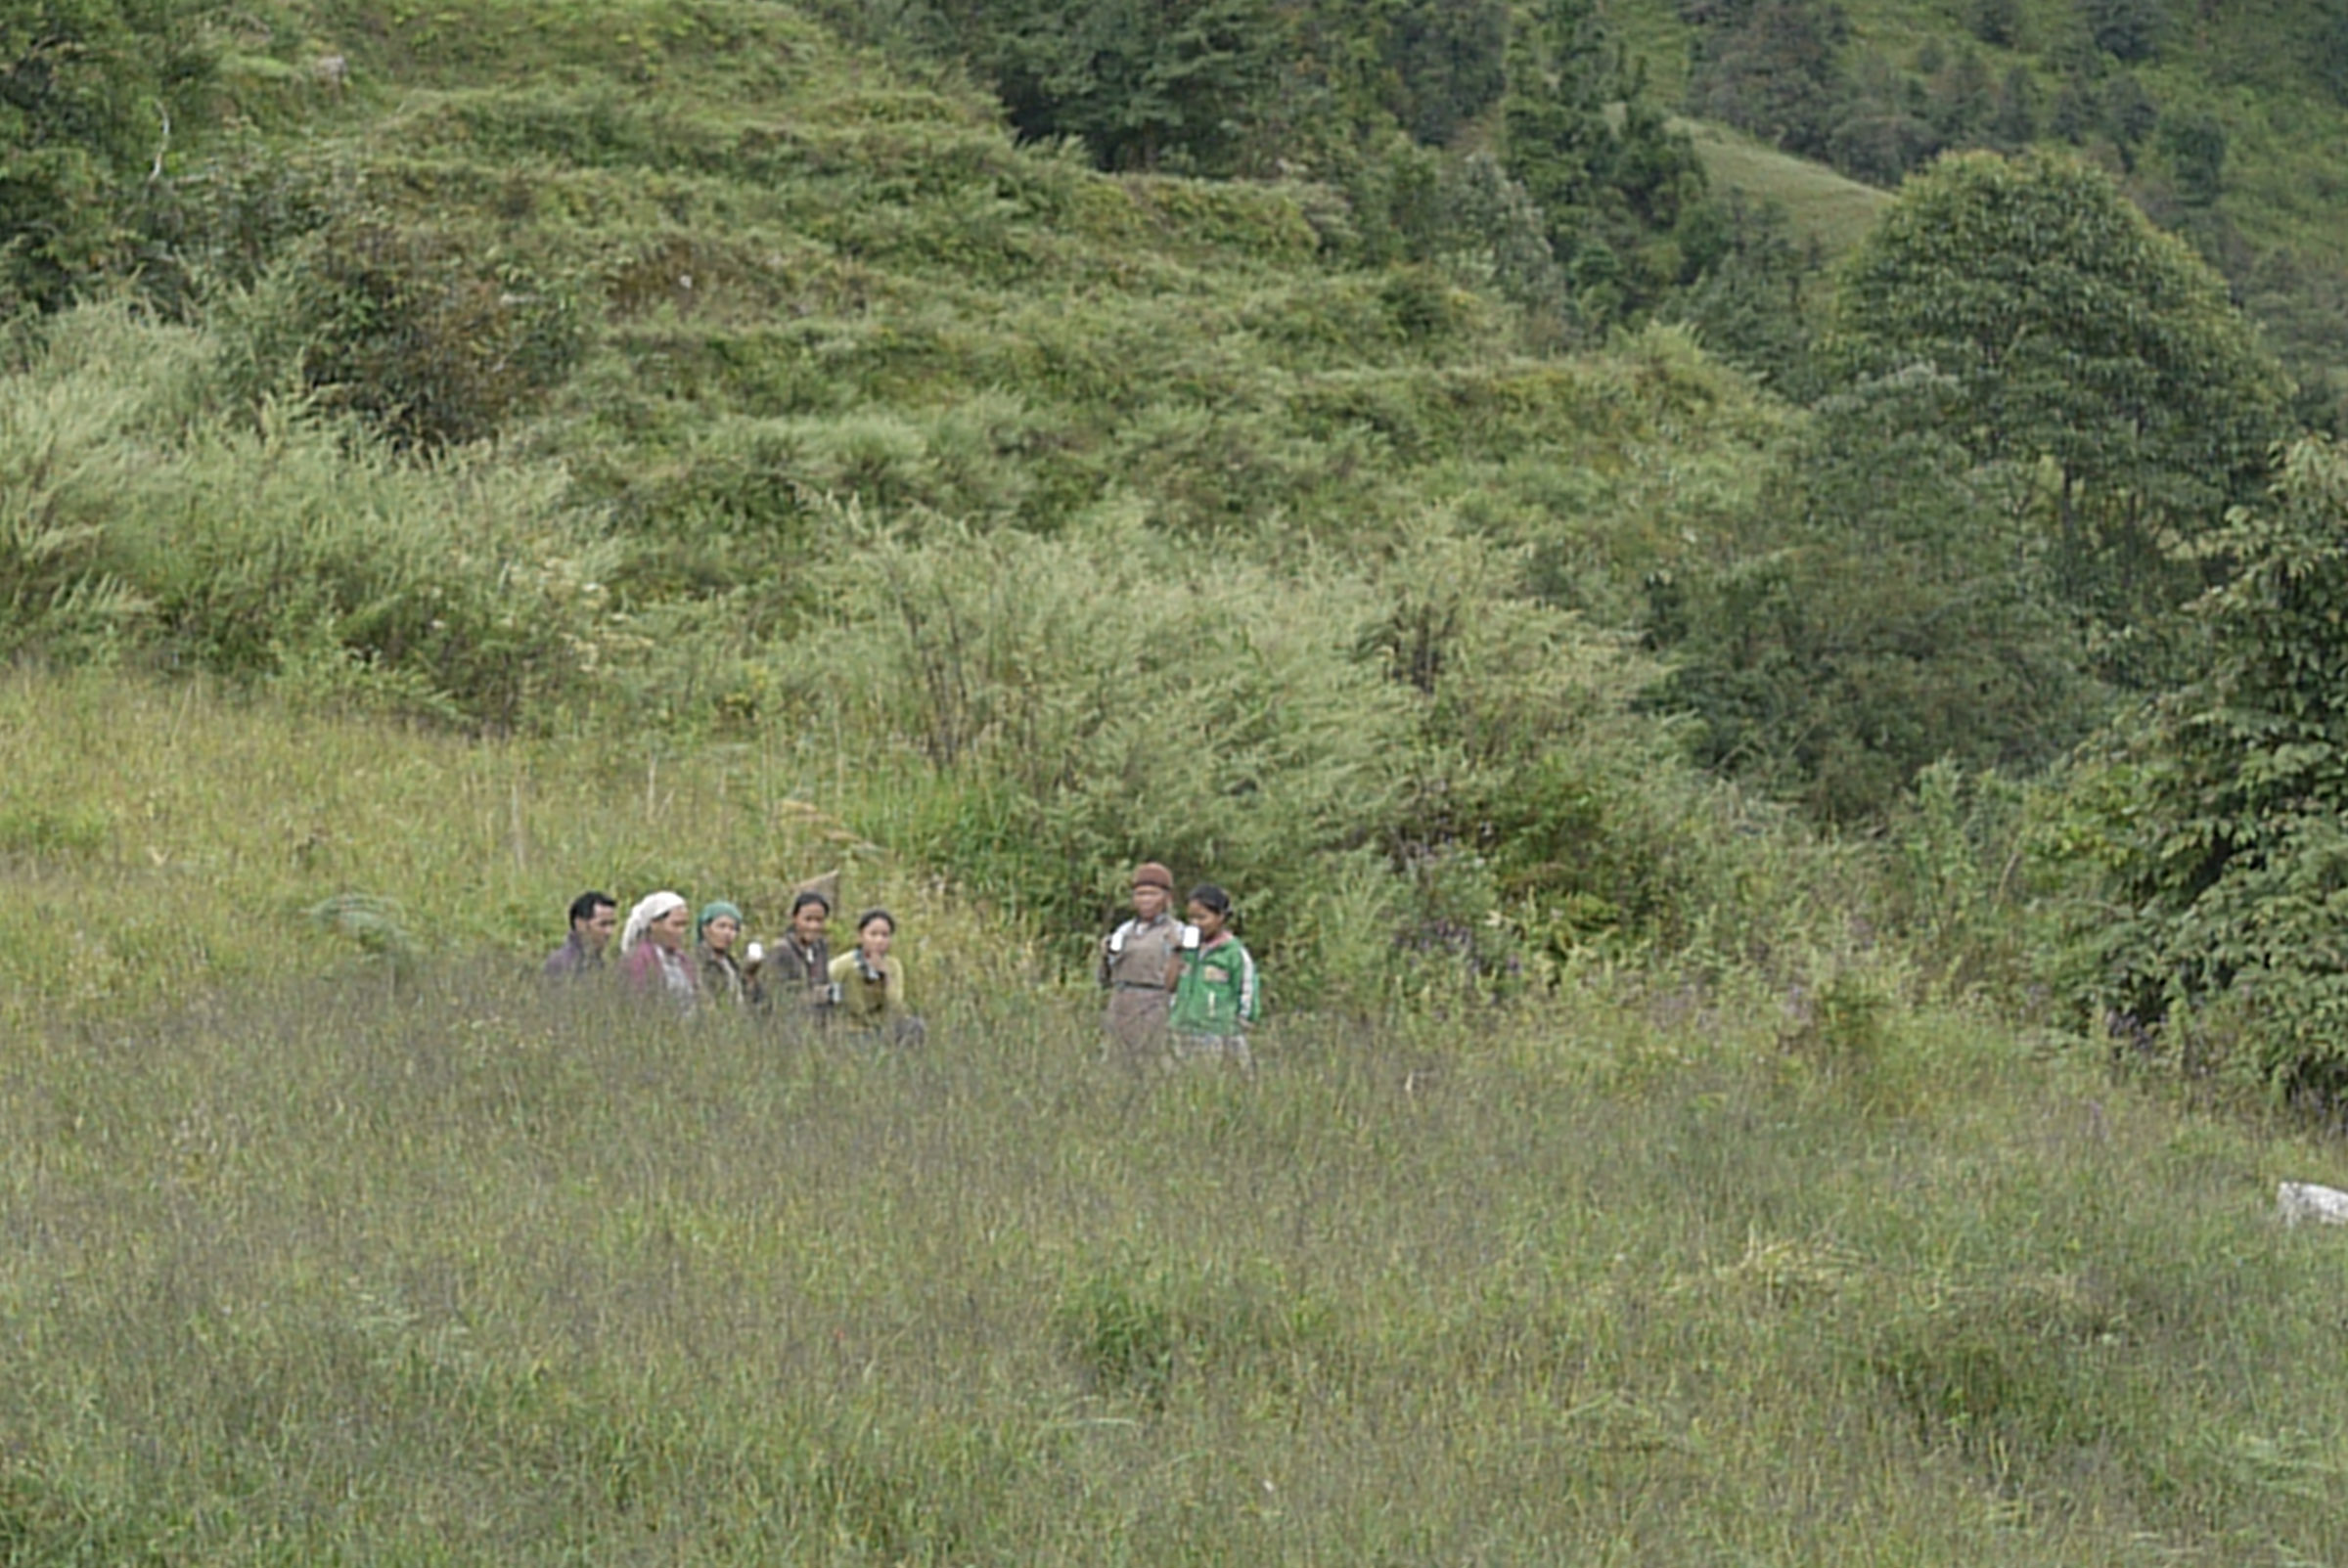 A group of women sit in a long grassy field, speaking to each other.